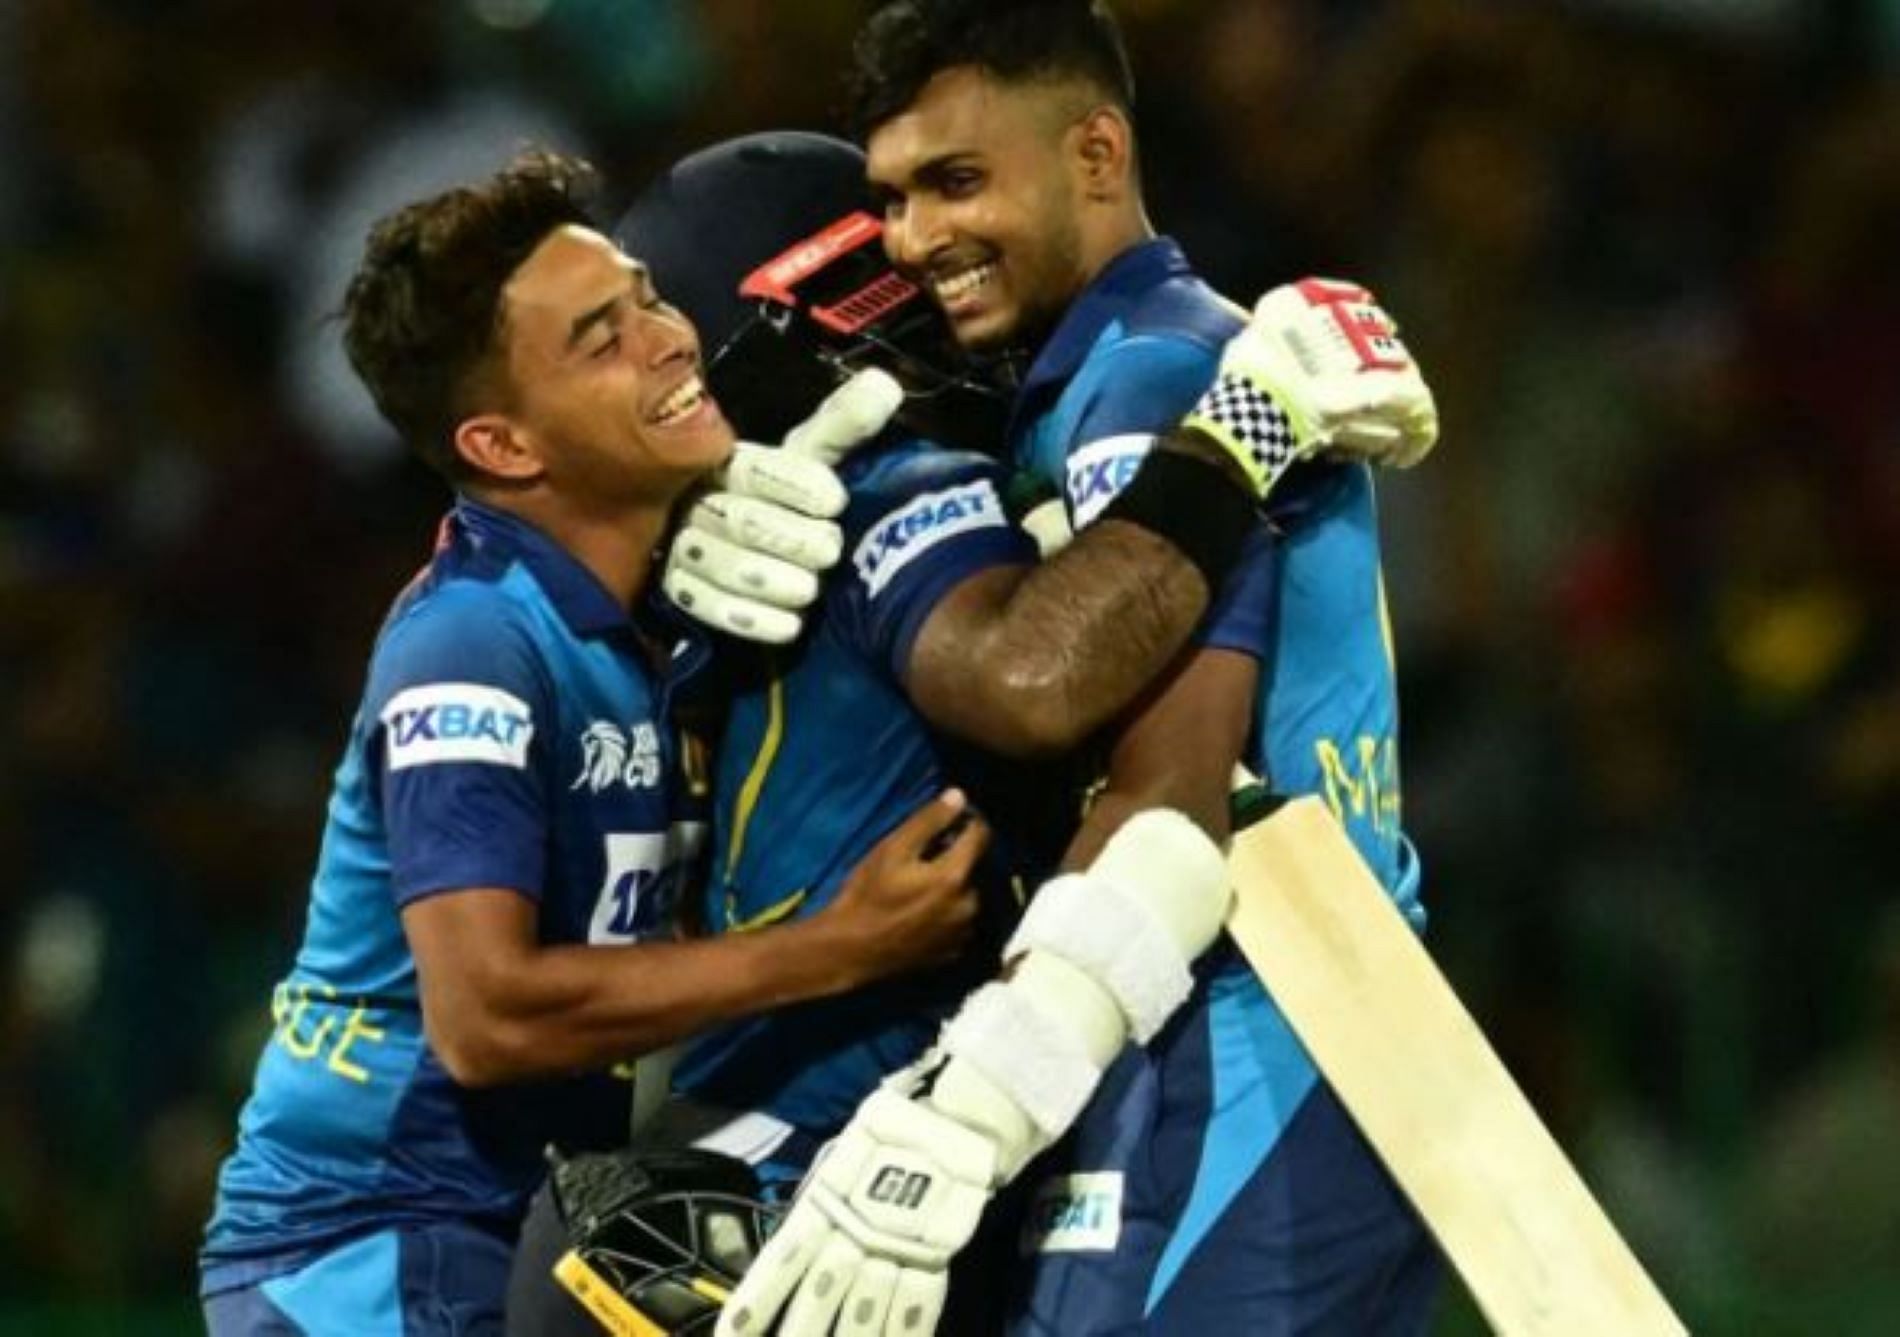 Sri Lanka sealed an incredible last-ball victory to qualify for the Asia Cup final.